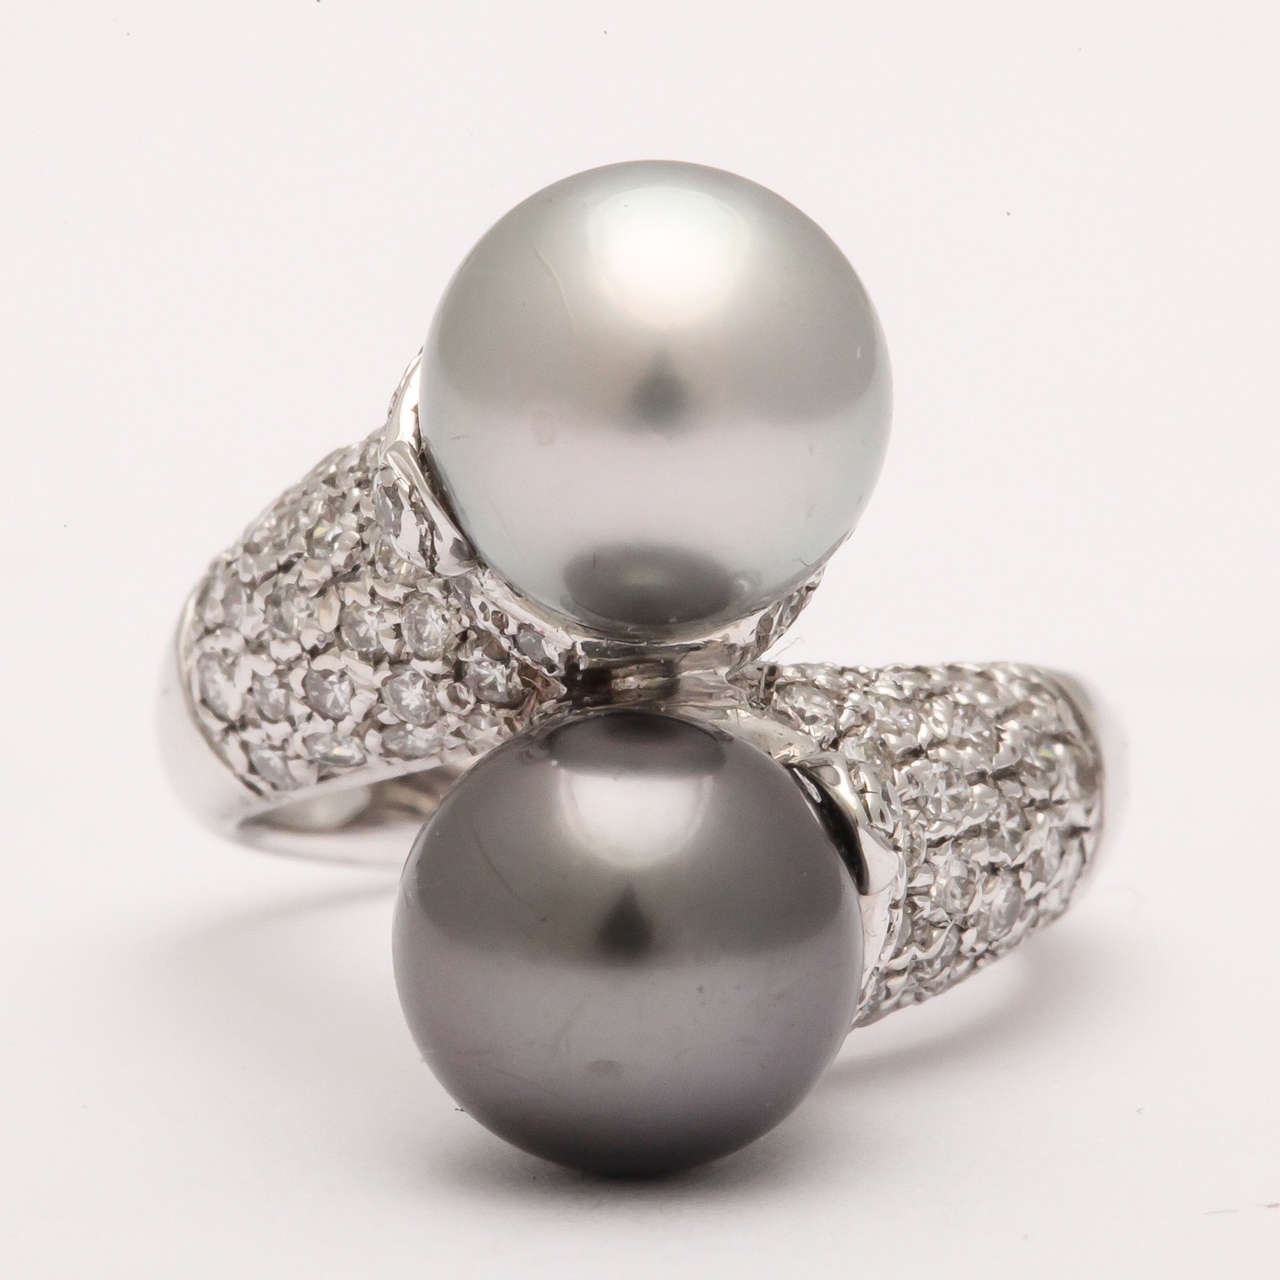 18kt White Gold & Diamond Cross Over Ring set with one Black Pearl & 1 white Pearl.  Each Pearl measuring approximately 8.5mm.  Marked as 750 or 18kt Gold.  The shoulders are pave set with clean,white full cut Diamonds and the Pearls are blemish